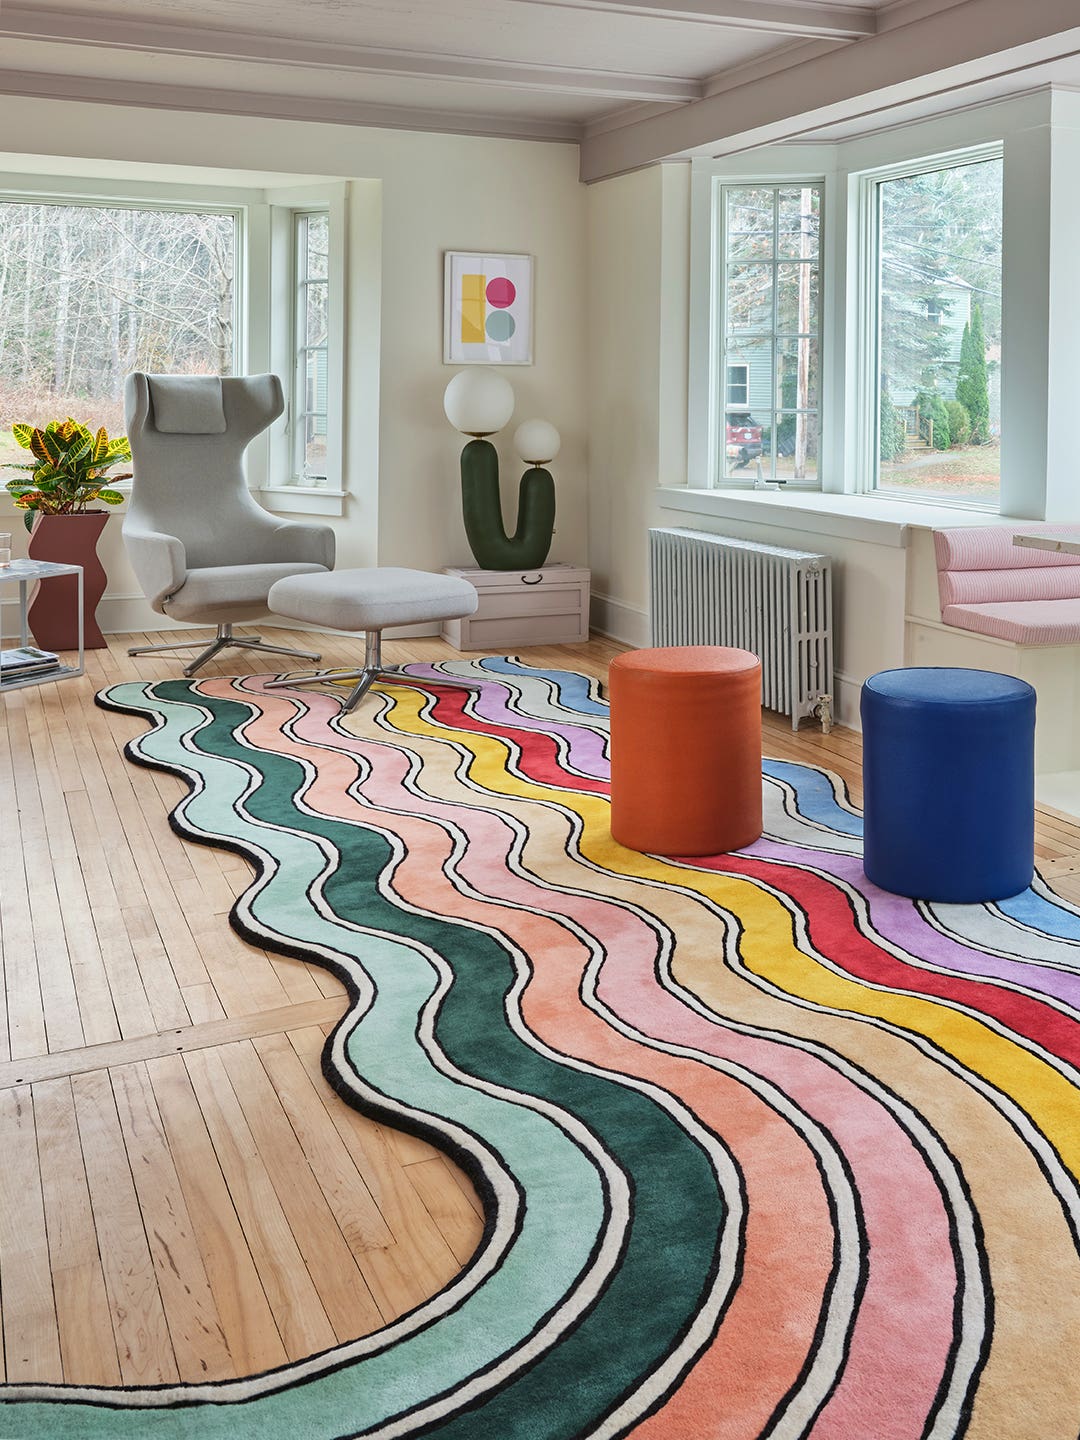 rainbow rug and colorful stools